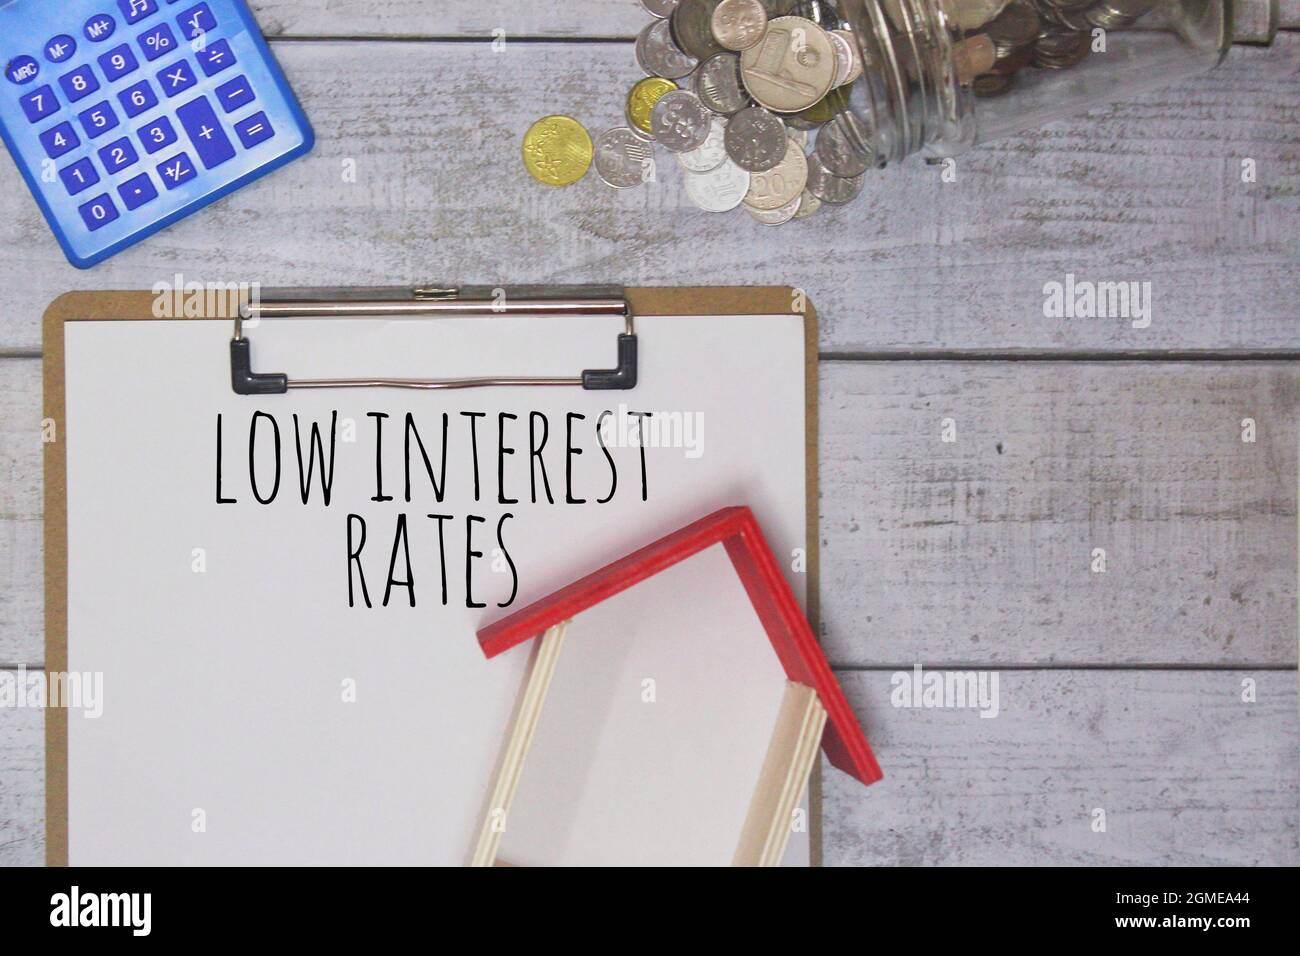 LOW INTEREST RATES text, miniature house, calculator and coins on wooden table. Stock Photo